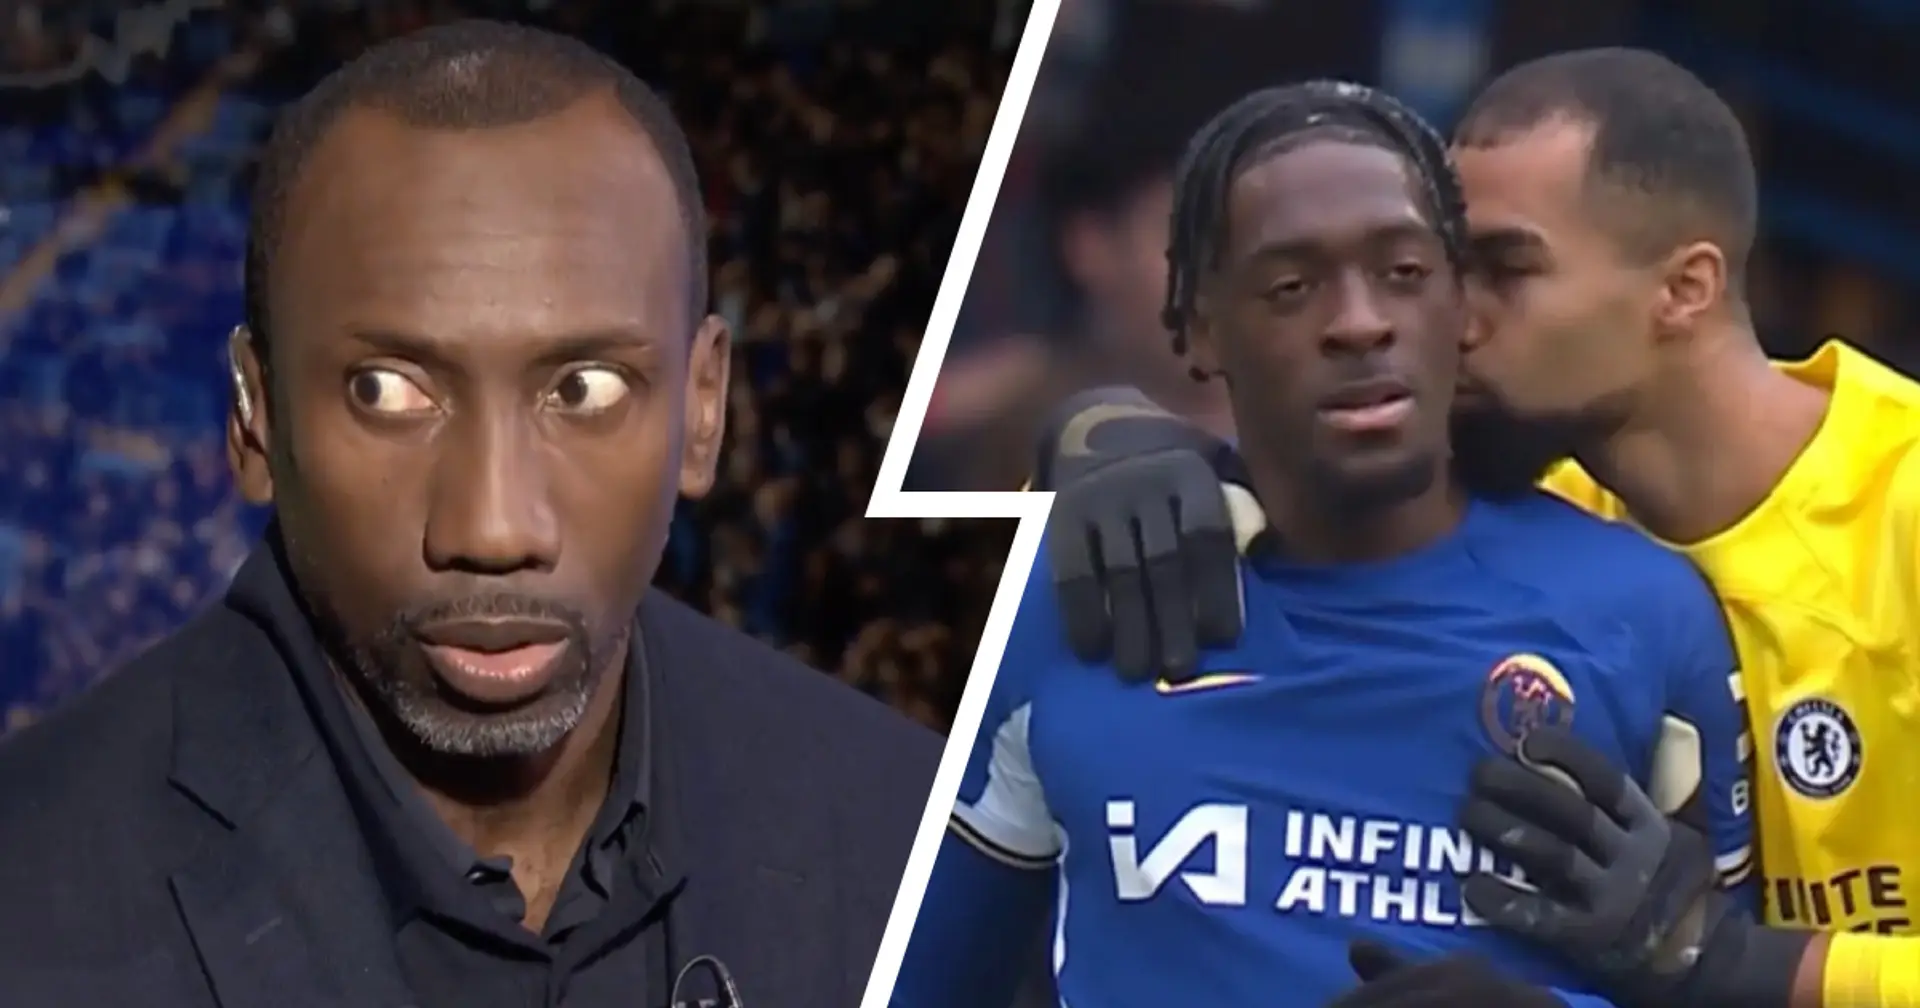 'He's lucky': Jimmy Floyd Hasselbaink slams one chelsea player after Leicester game — not Sterling